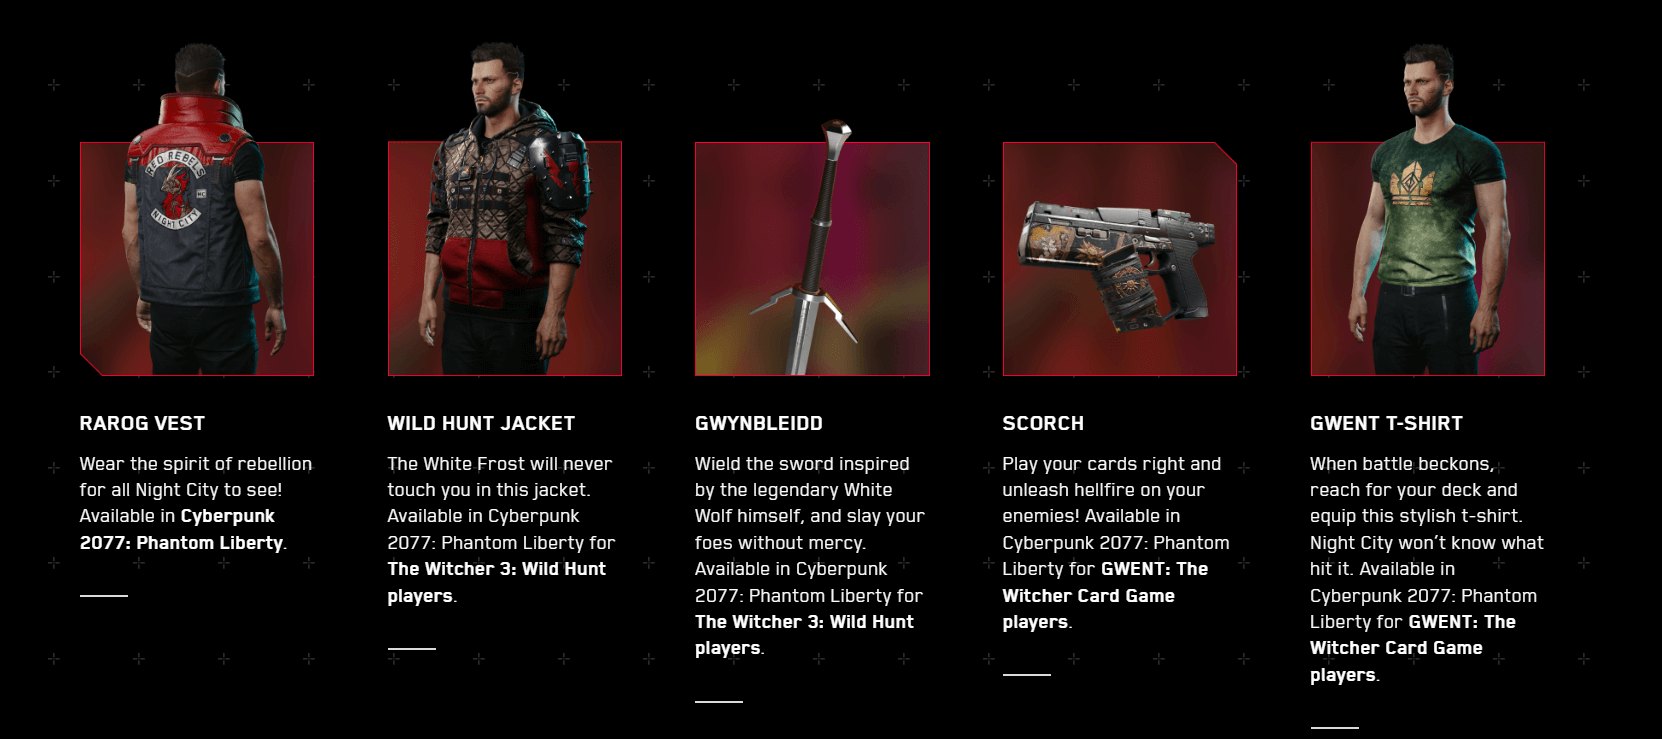 Some of the Free Bonus Items for the Phantom Liberty Expansion